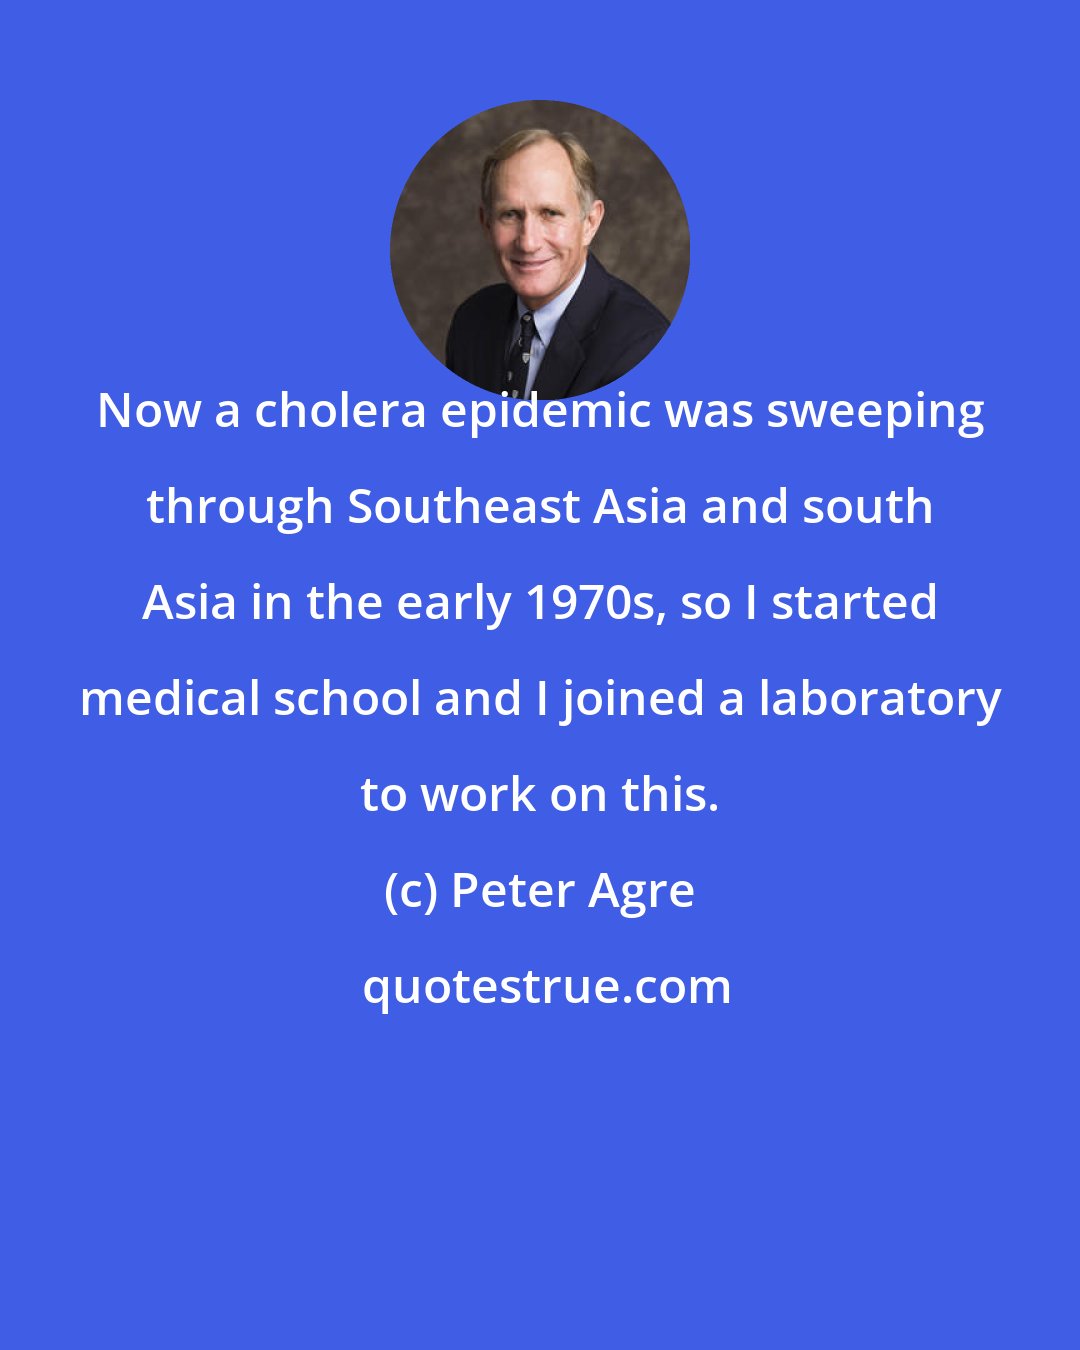 Peter Agre: Now a cholera epidemic was sweeping through Southeast Asia and south Asia in the early 1970s, so I started medical school and I joined a laboratory to work on this.